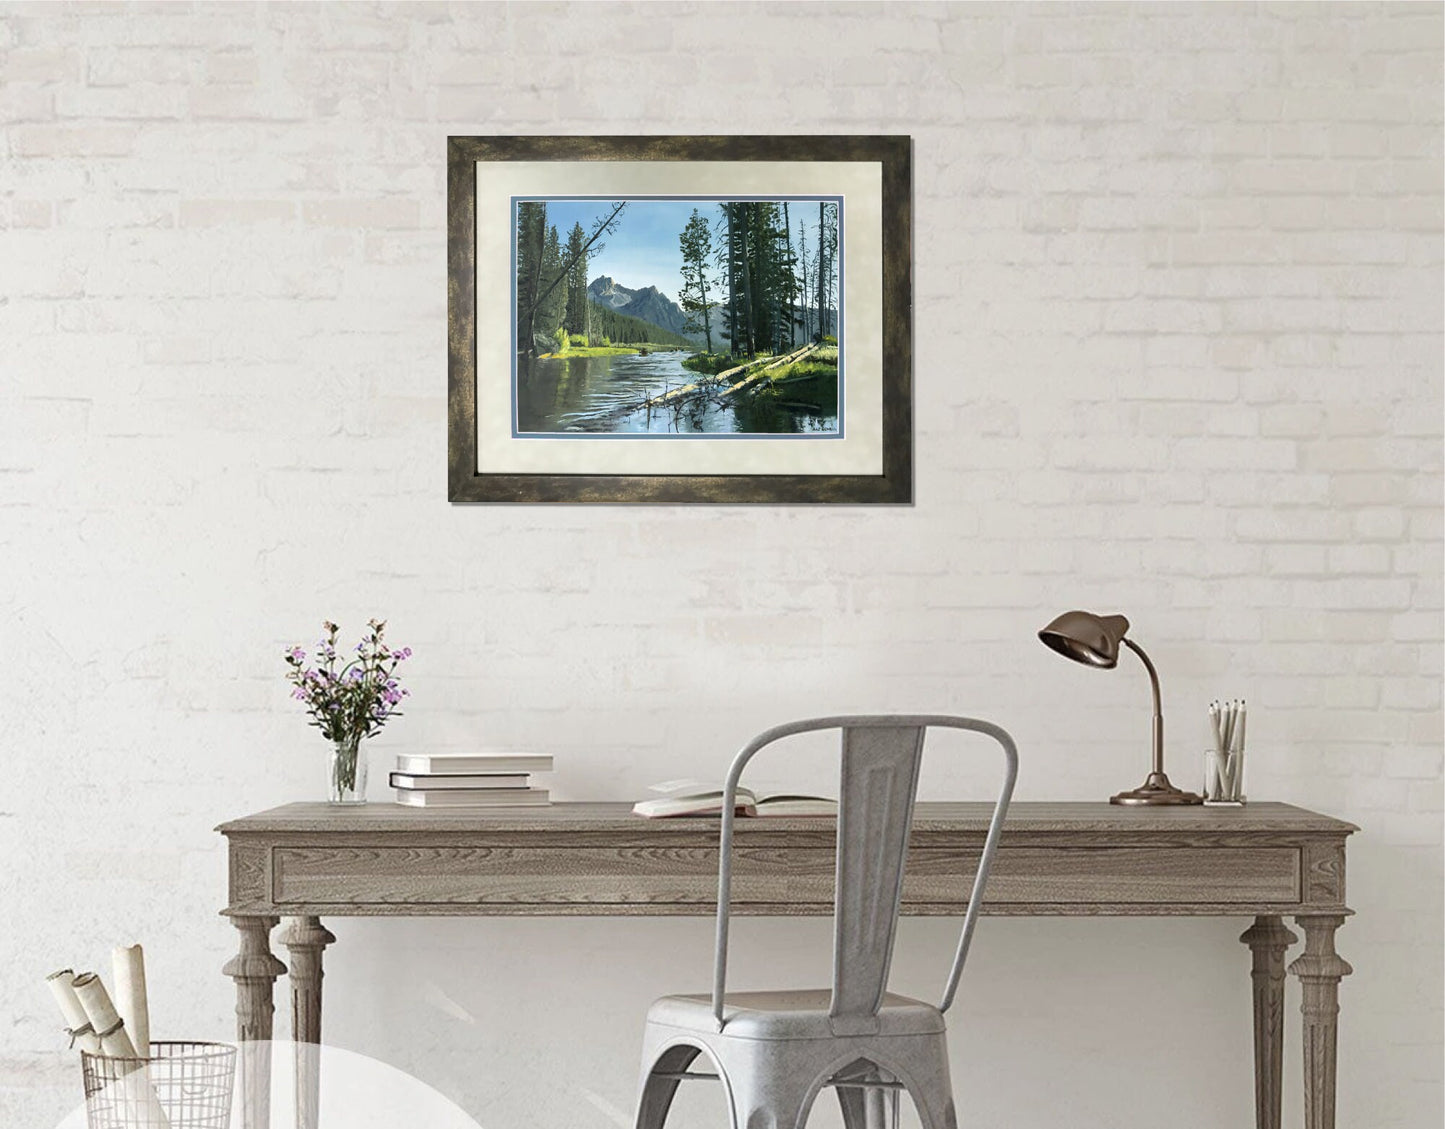 "Stanley Lake Outlet" - a Signed Edition Print of Idaho's fabulous Stanley Lake at the outlet.